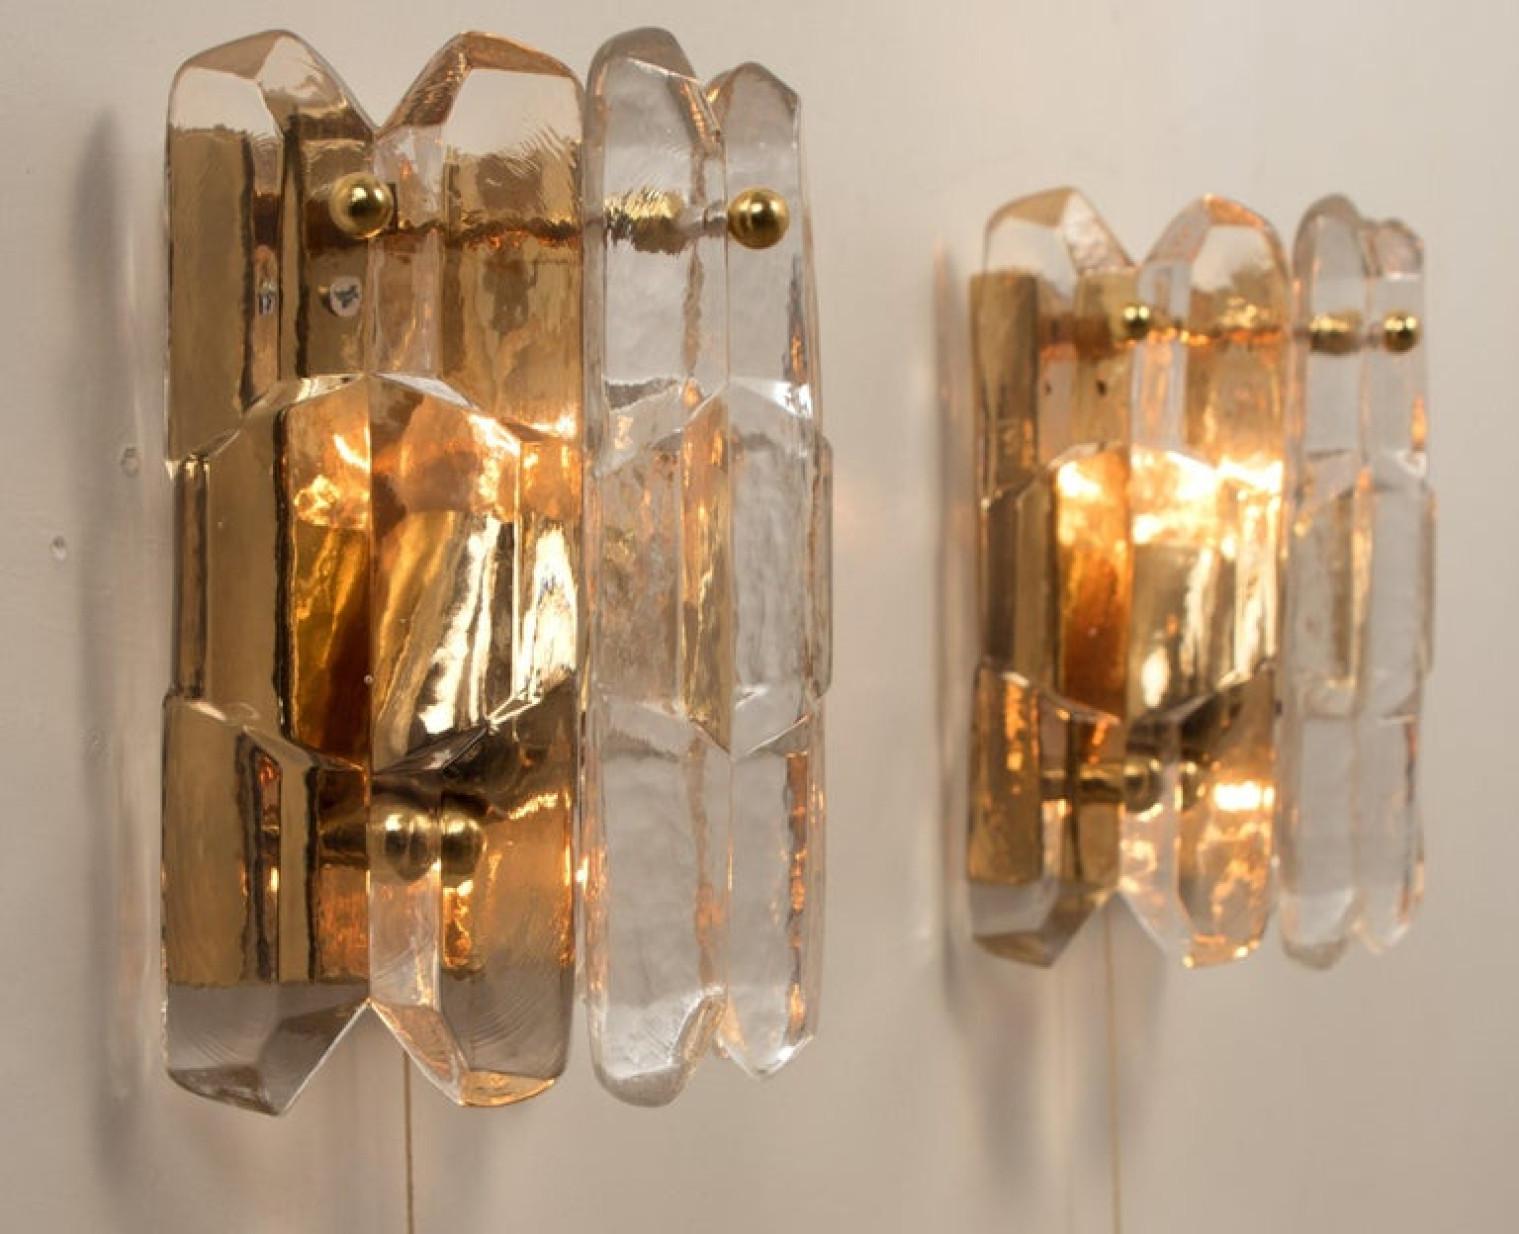 1 of 2 Pair of J.T. Kalmar 'Palazzo' Wall Light Fixtures Gilt Brass and Glass For Sale 4